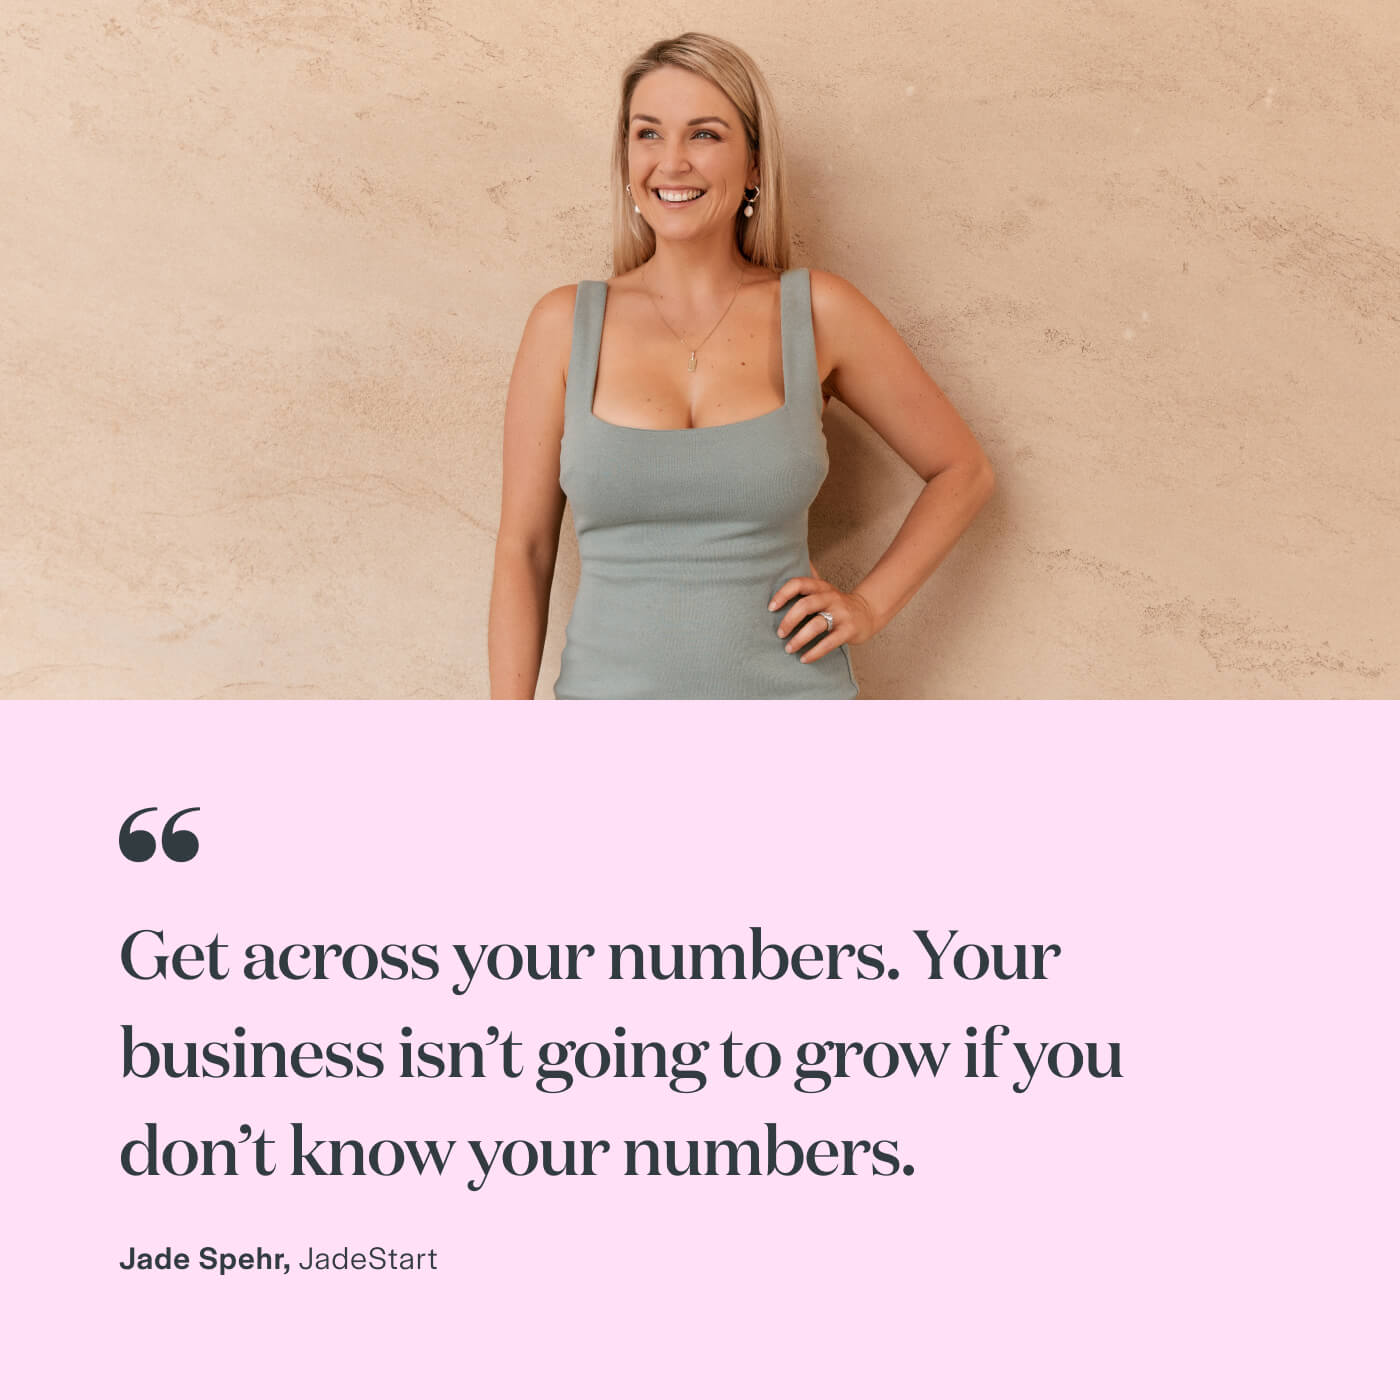 “Get across your numbers. Your business isn’t going to grow if you don’t know your numbers.” Jade Spehr, JadeStart